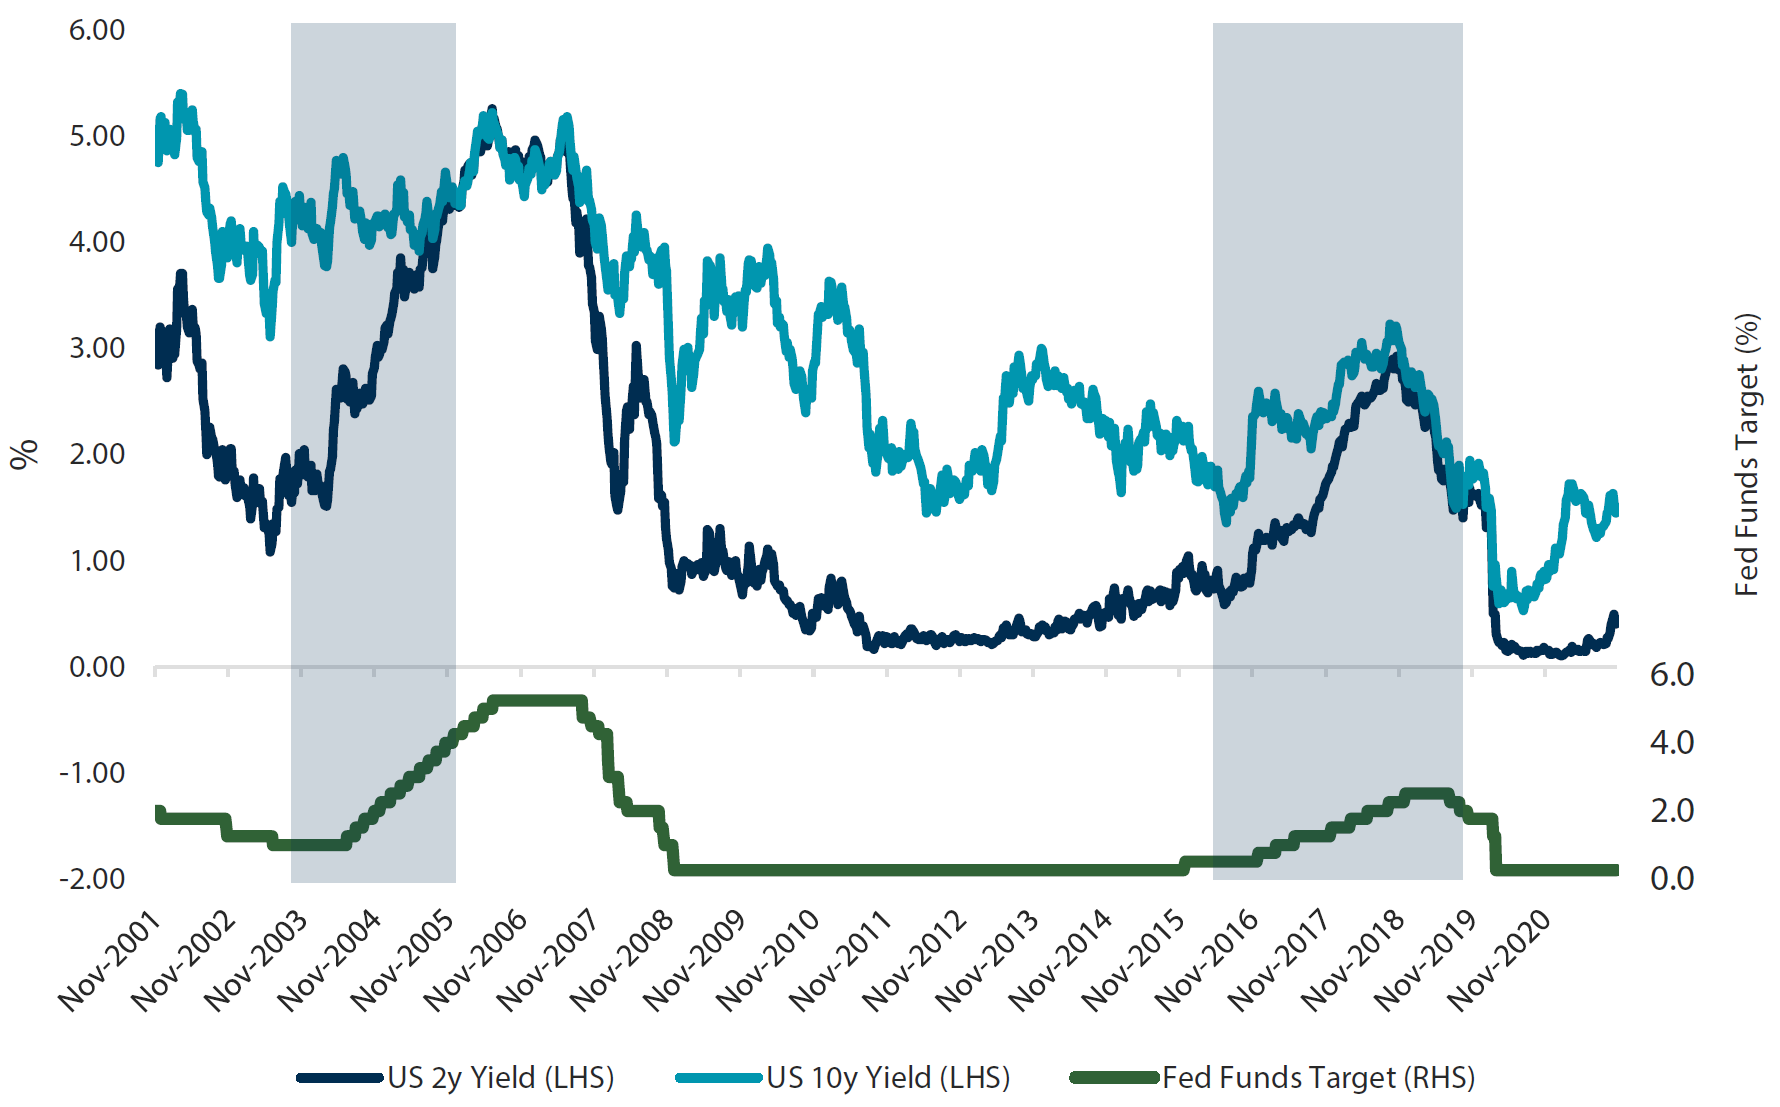 Chart 5: UST 2-year & 10-year yields and Fed Funds target